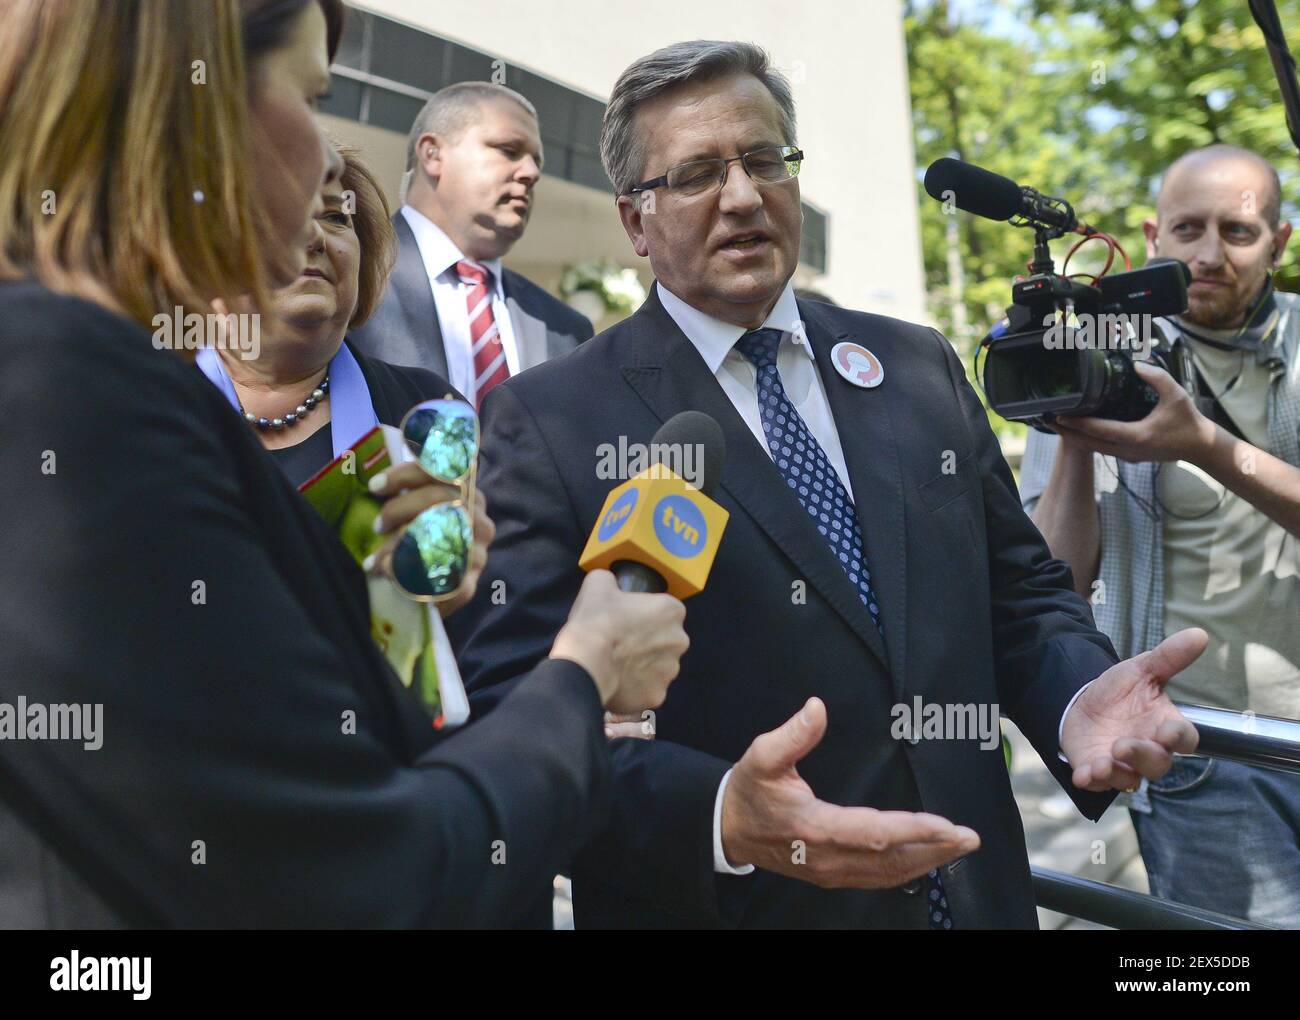 Bronislaw Komorowski during his Presidential 2015 Election Campaign ahead of the second round on Sunday May 24th, in Krakow-Nowa Huta, Poland, on May 18, 2015. (Photo by Artur Widak) *** Please Use Credit from Credit Field *** Stock Photo